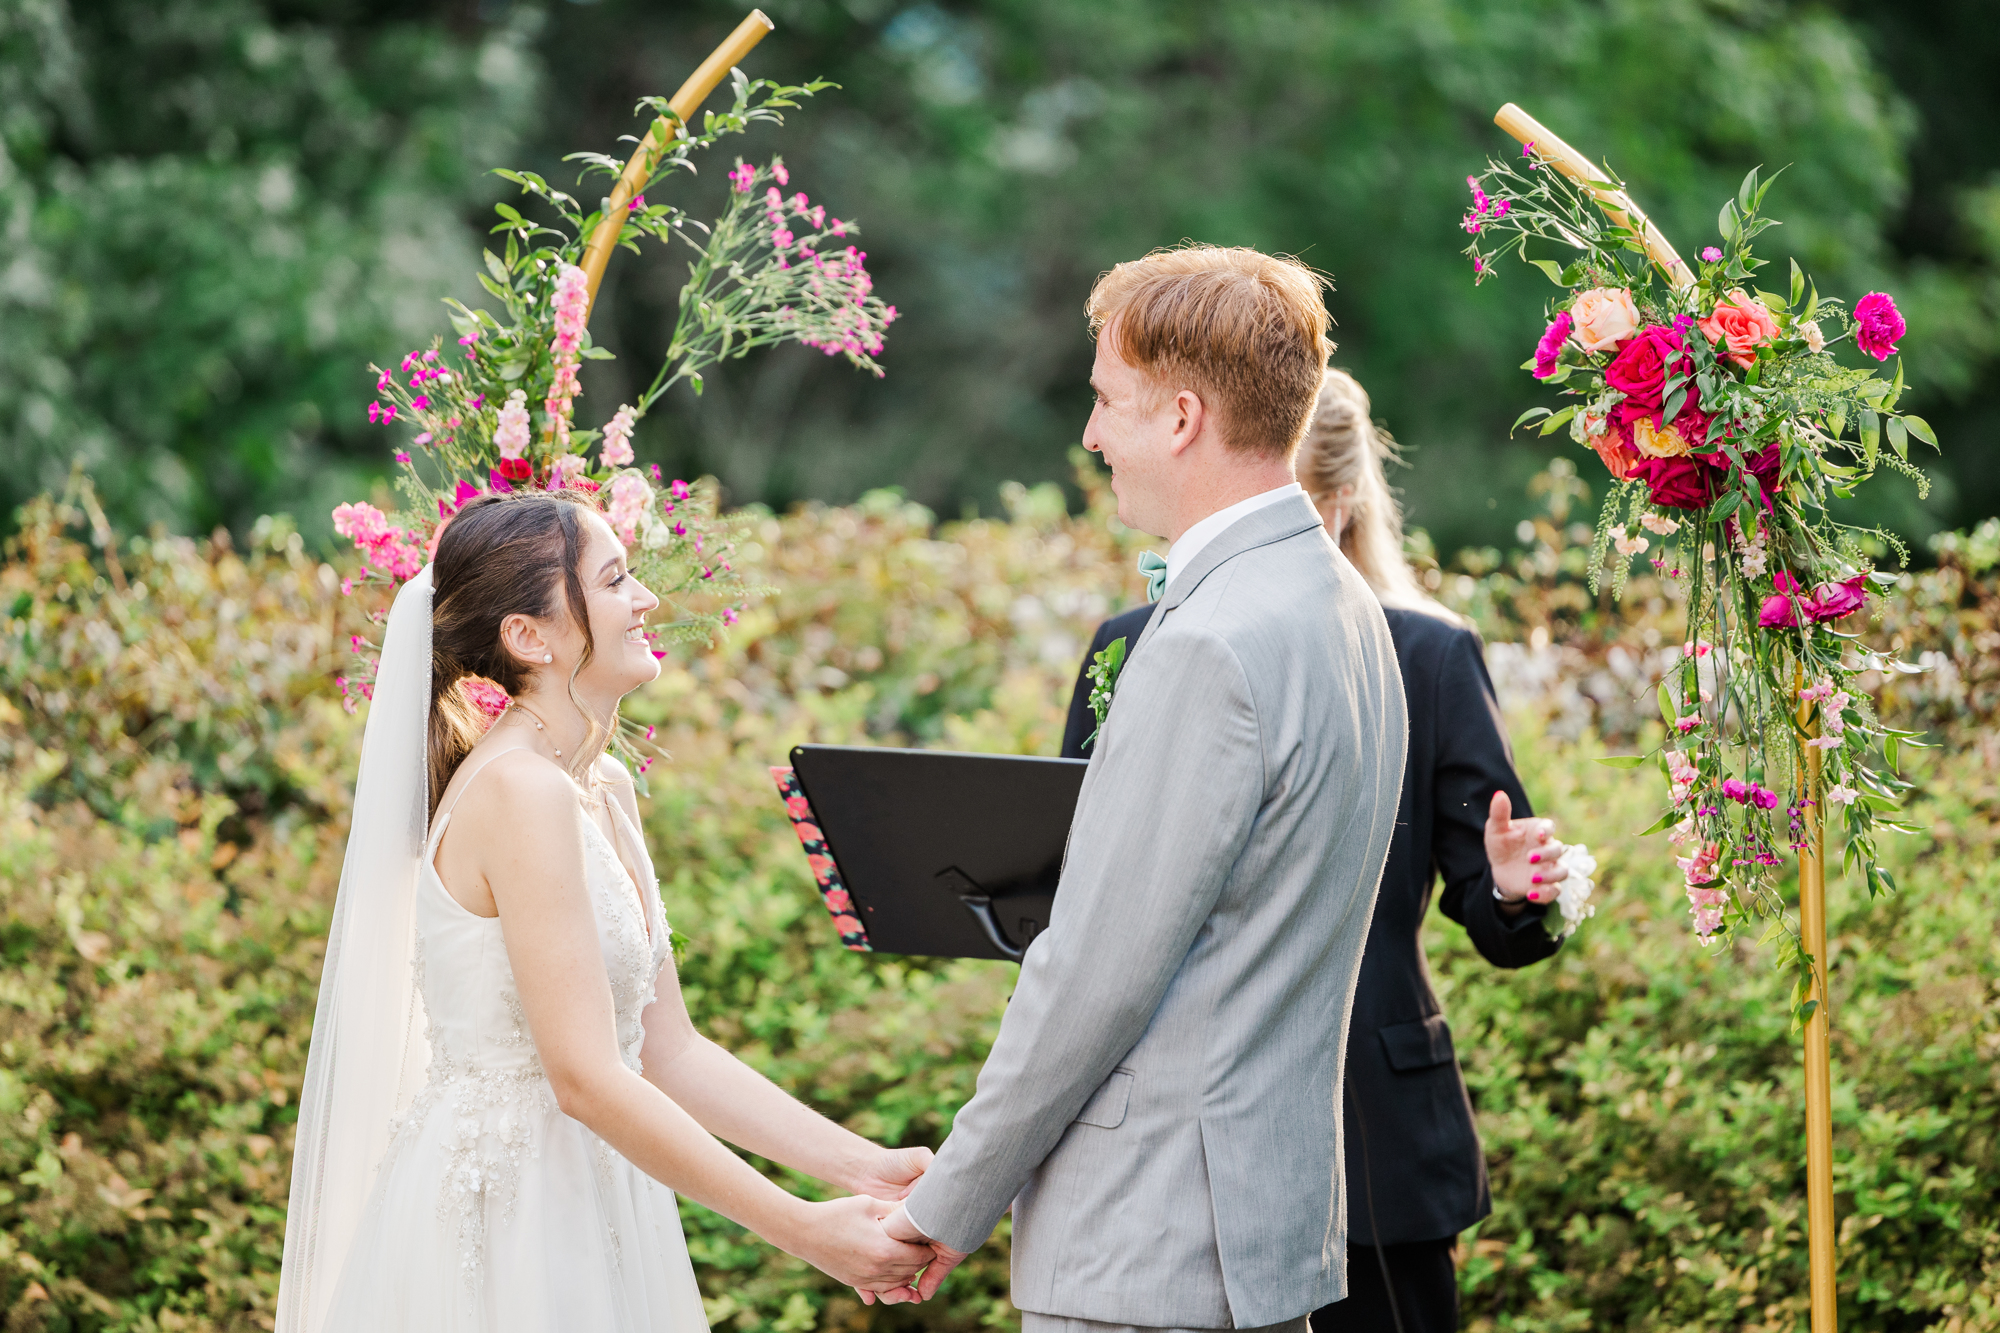 Cheerful Wedding at Briarcliff Manor in Summertime